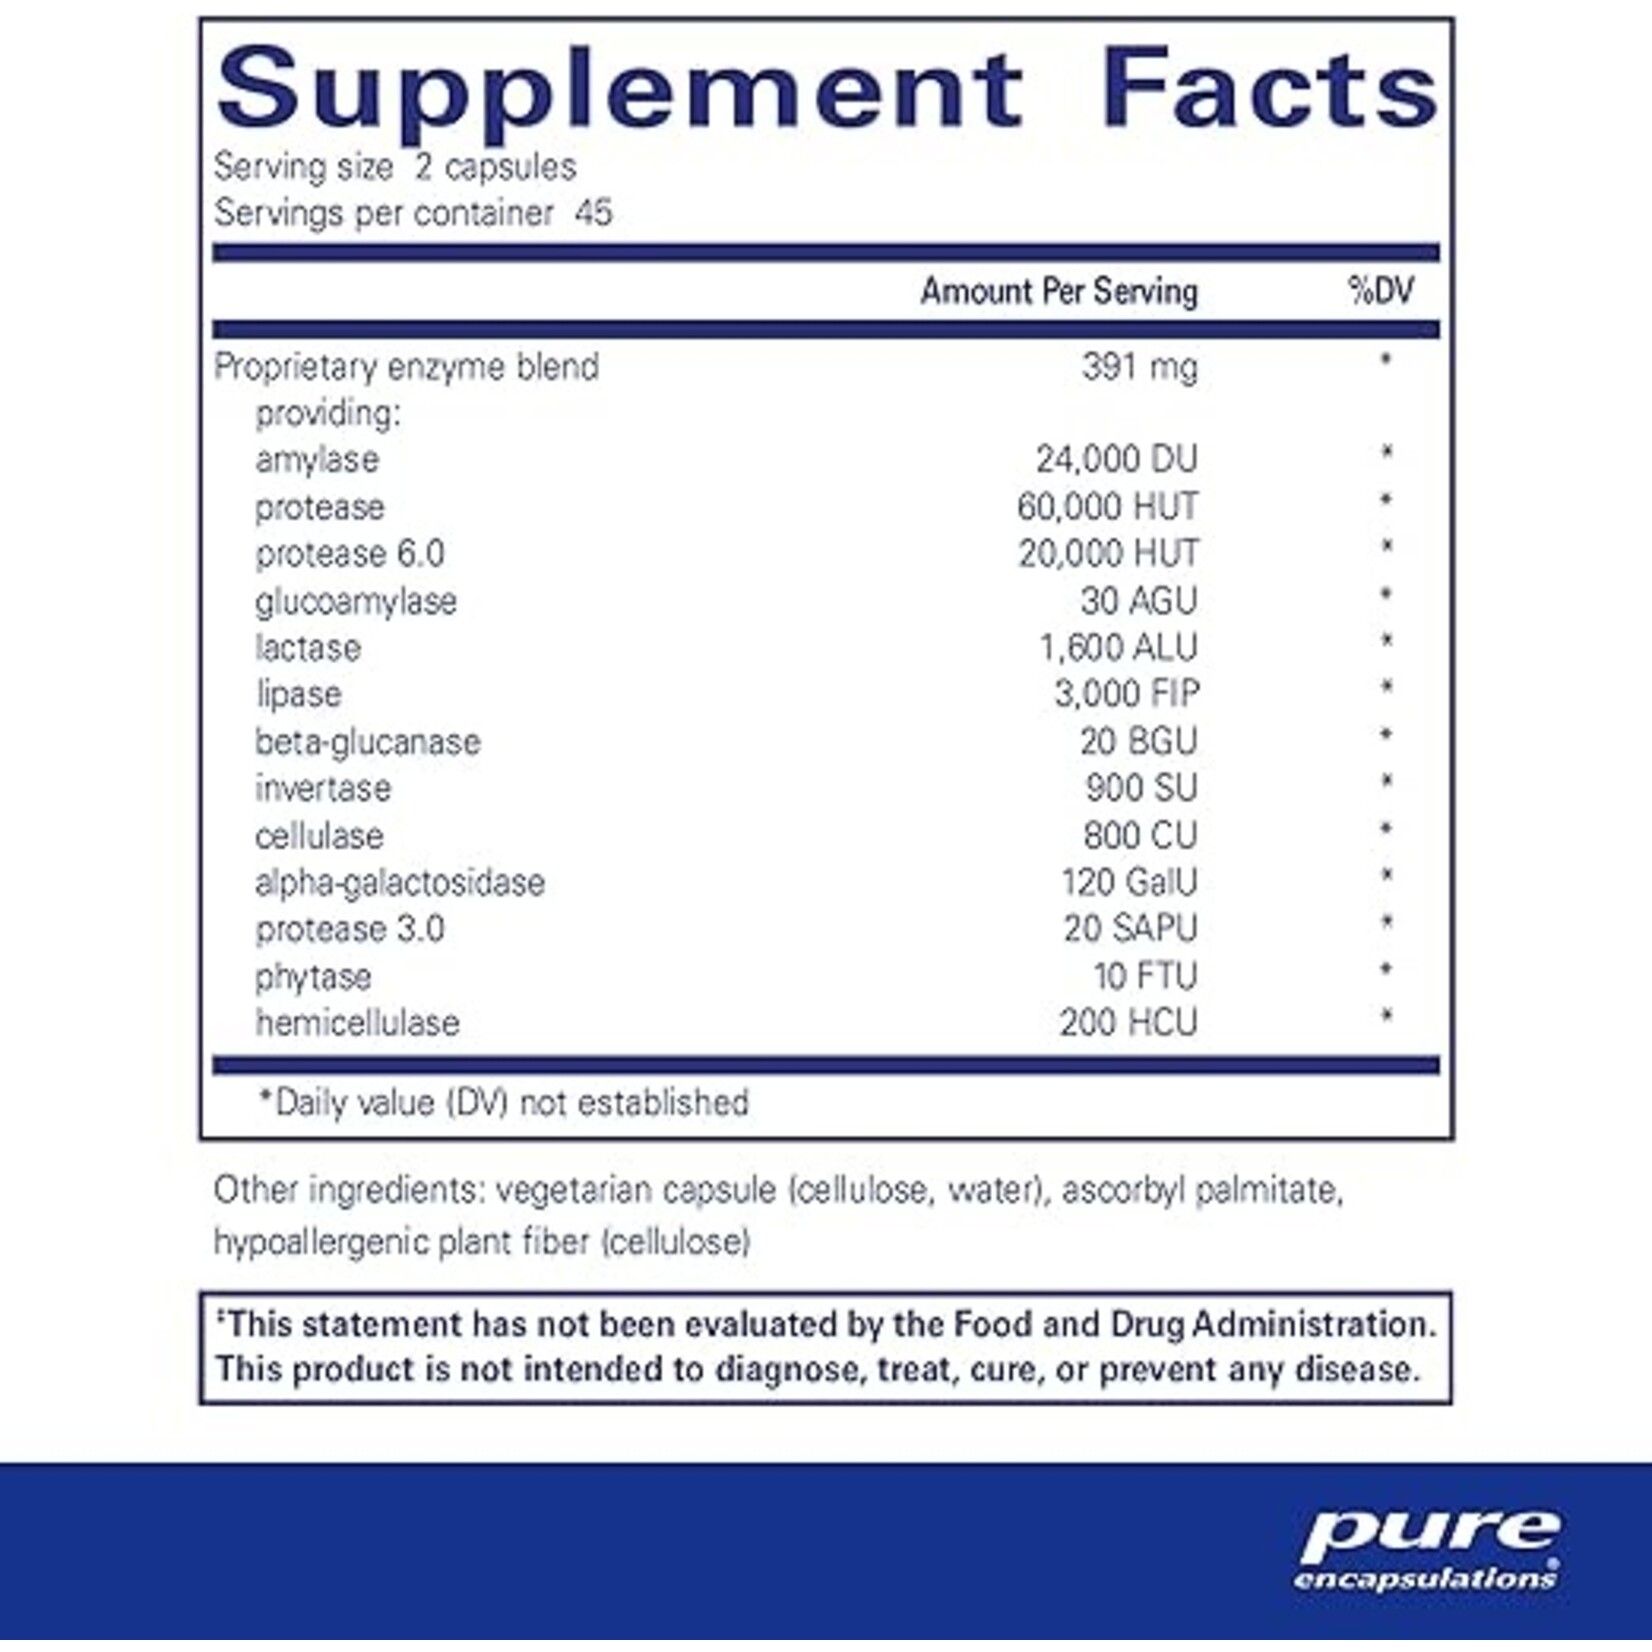 Pure Encapsulations Digestive Enzymes Ultra (Pure)